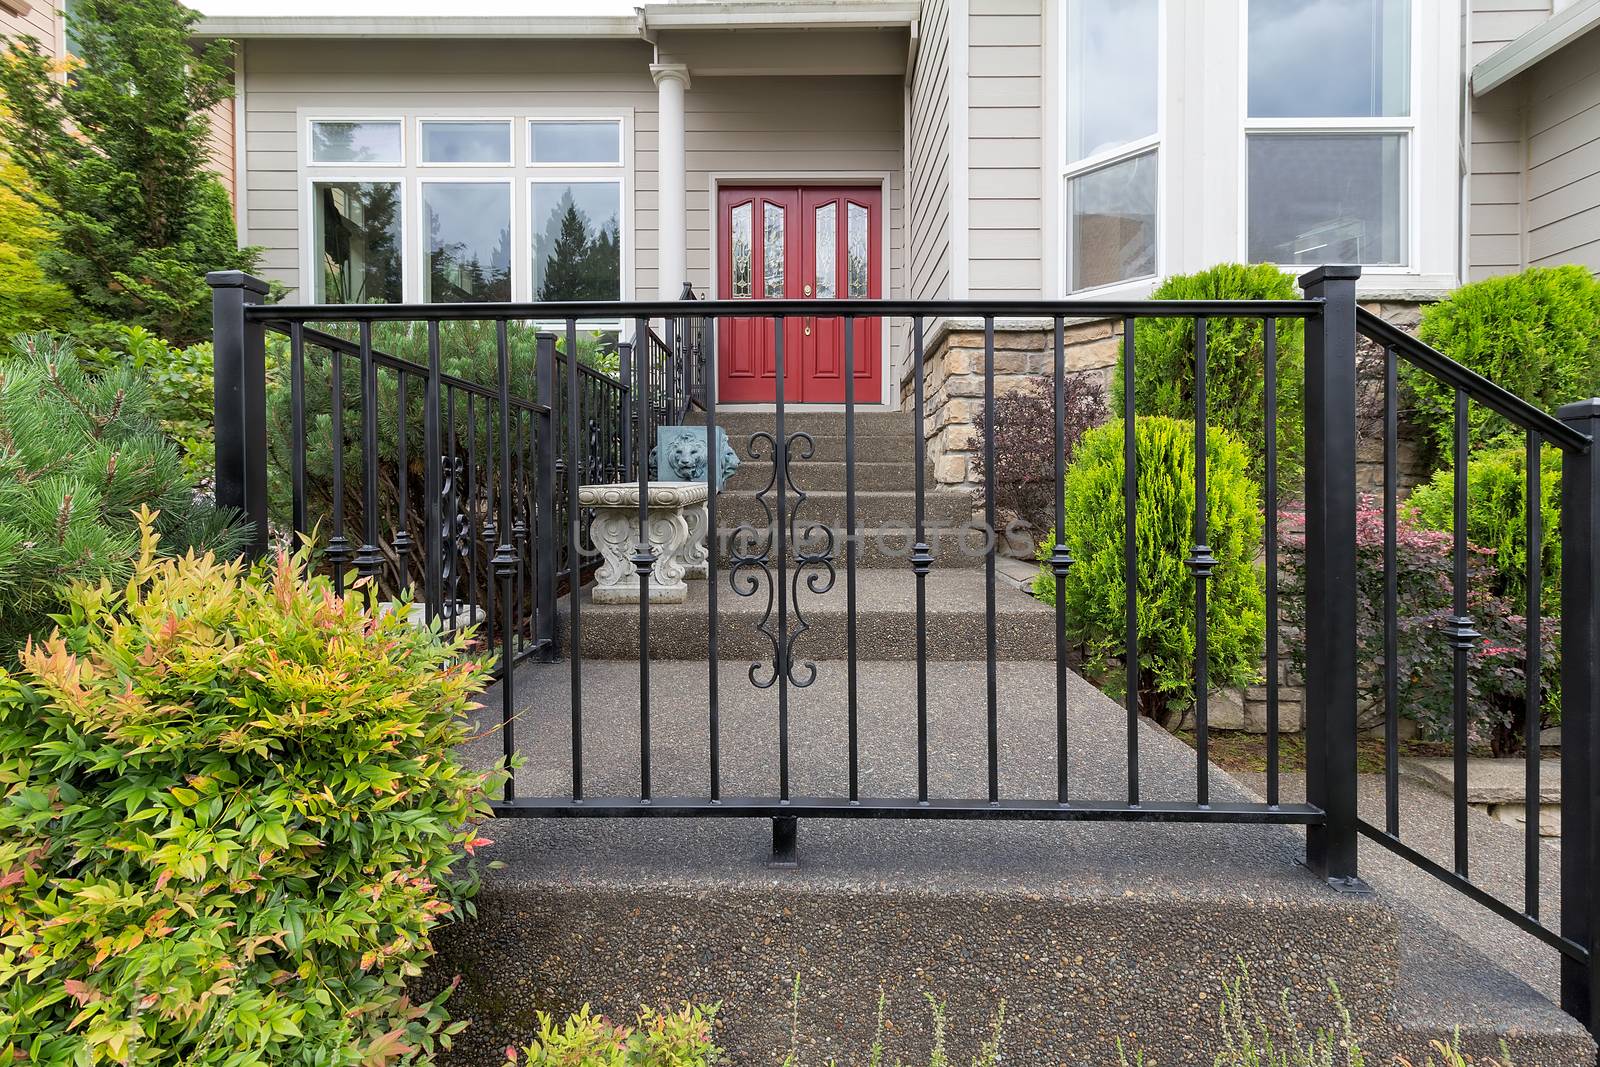 House front entrance with wrought iron railings on stairs with plants landscaping